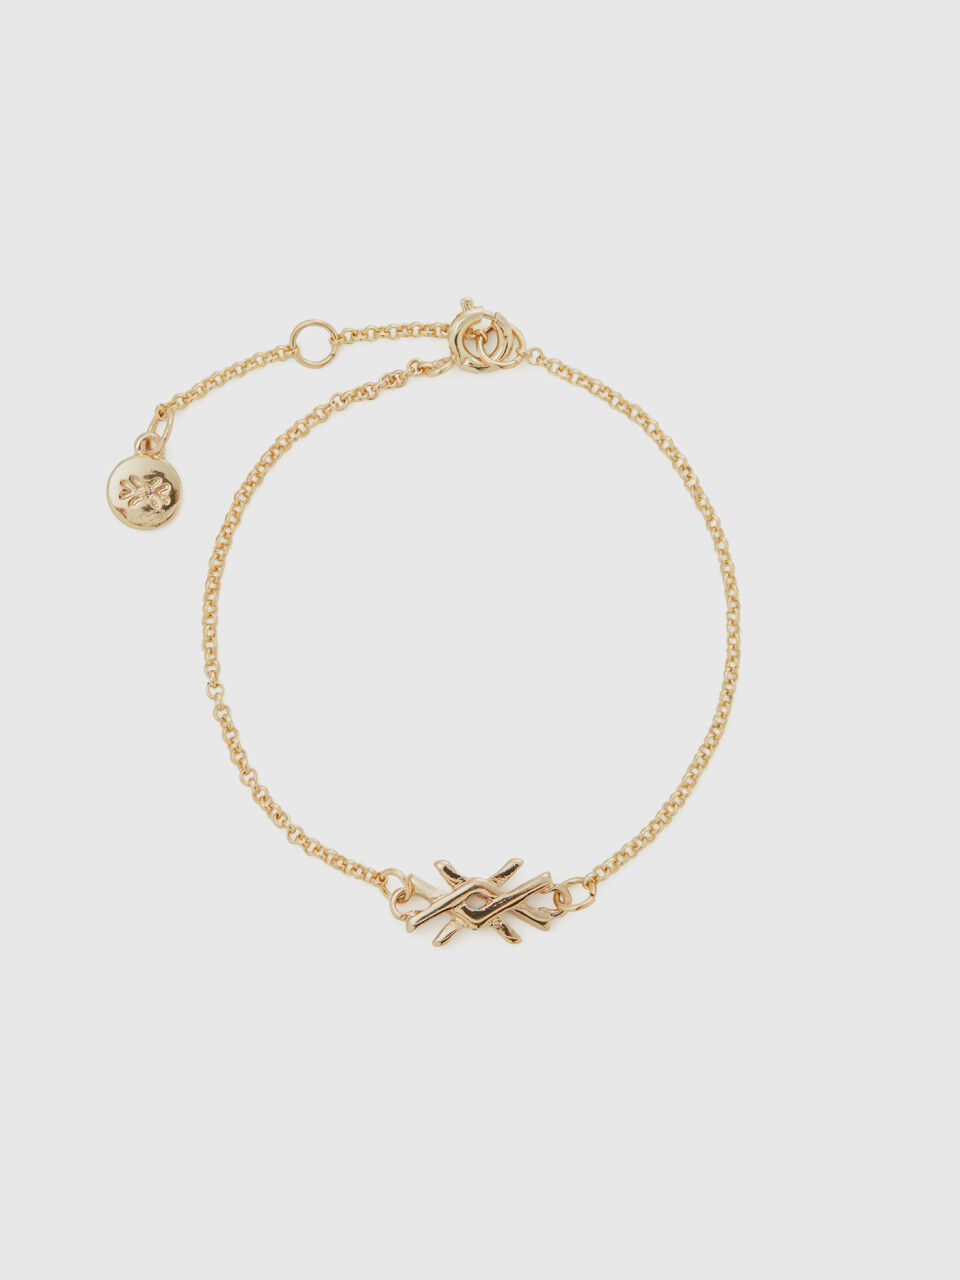 Gold bracelet with charm and logo